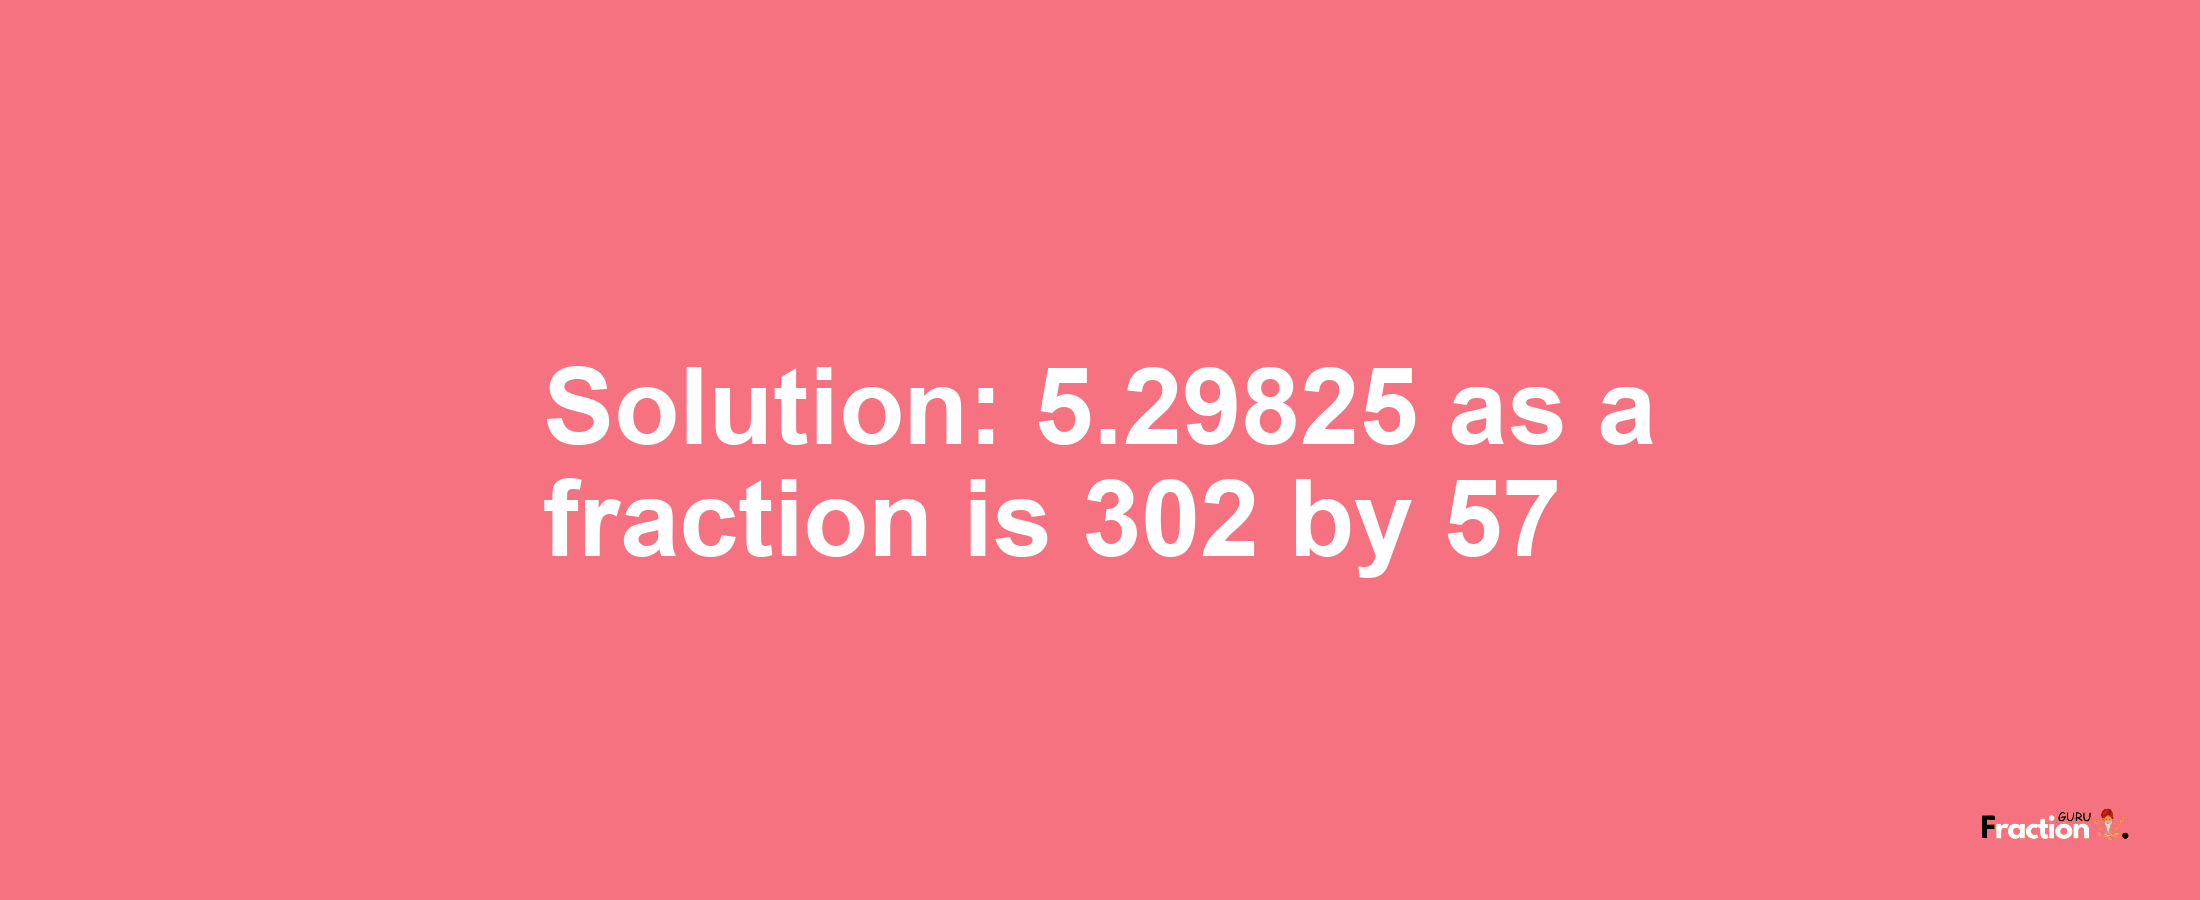 Solution:5.29825 as a fraction is 302/57